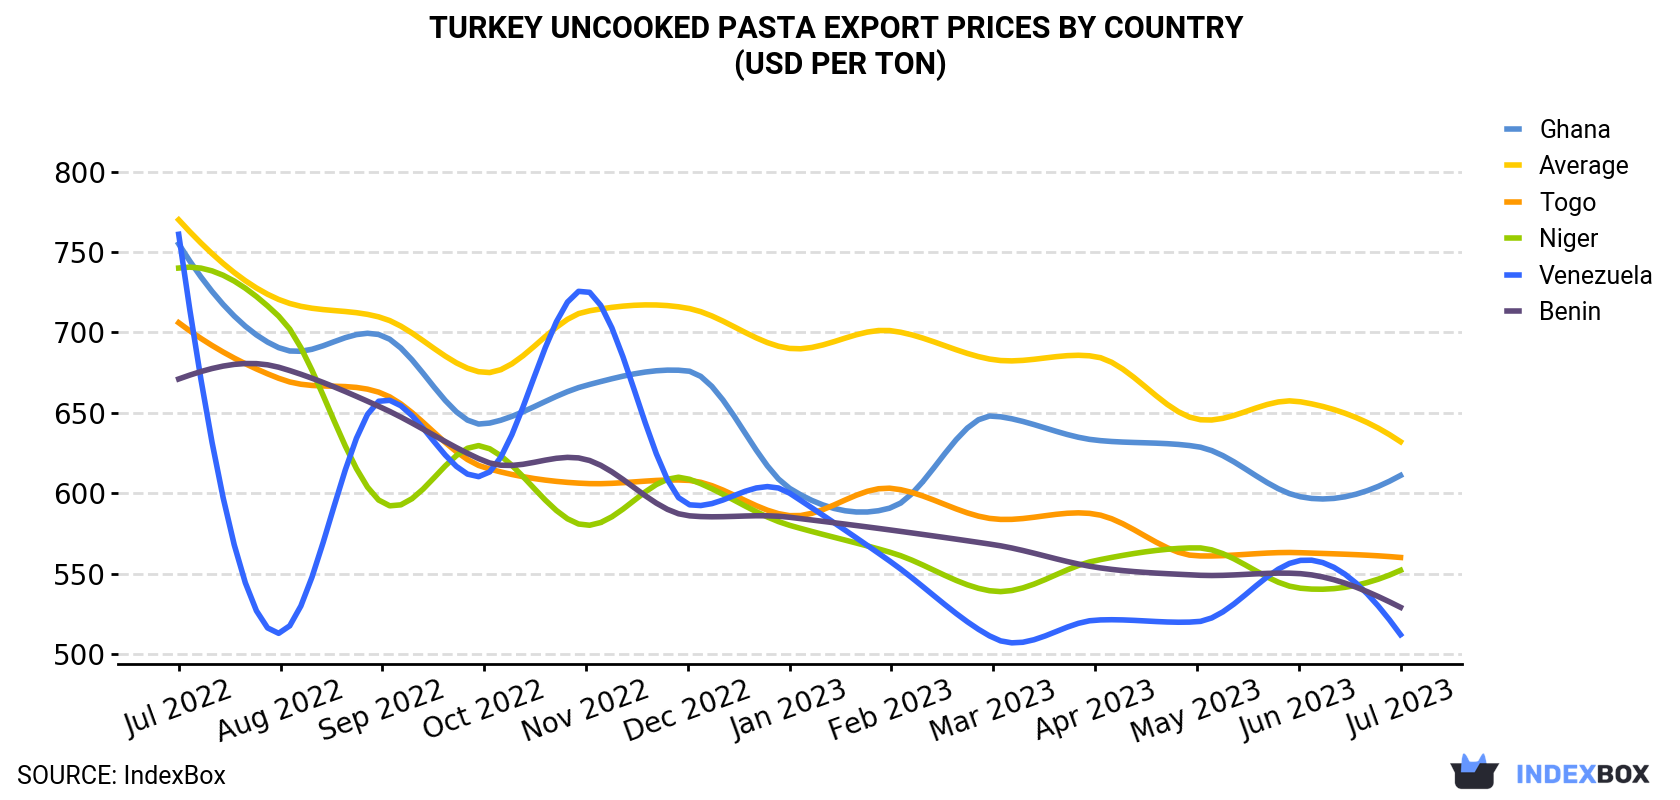 Turkey Uncooked Pasta Export Prices By Country (USD Per Ton)